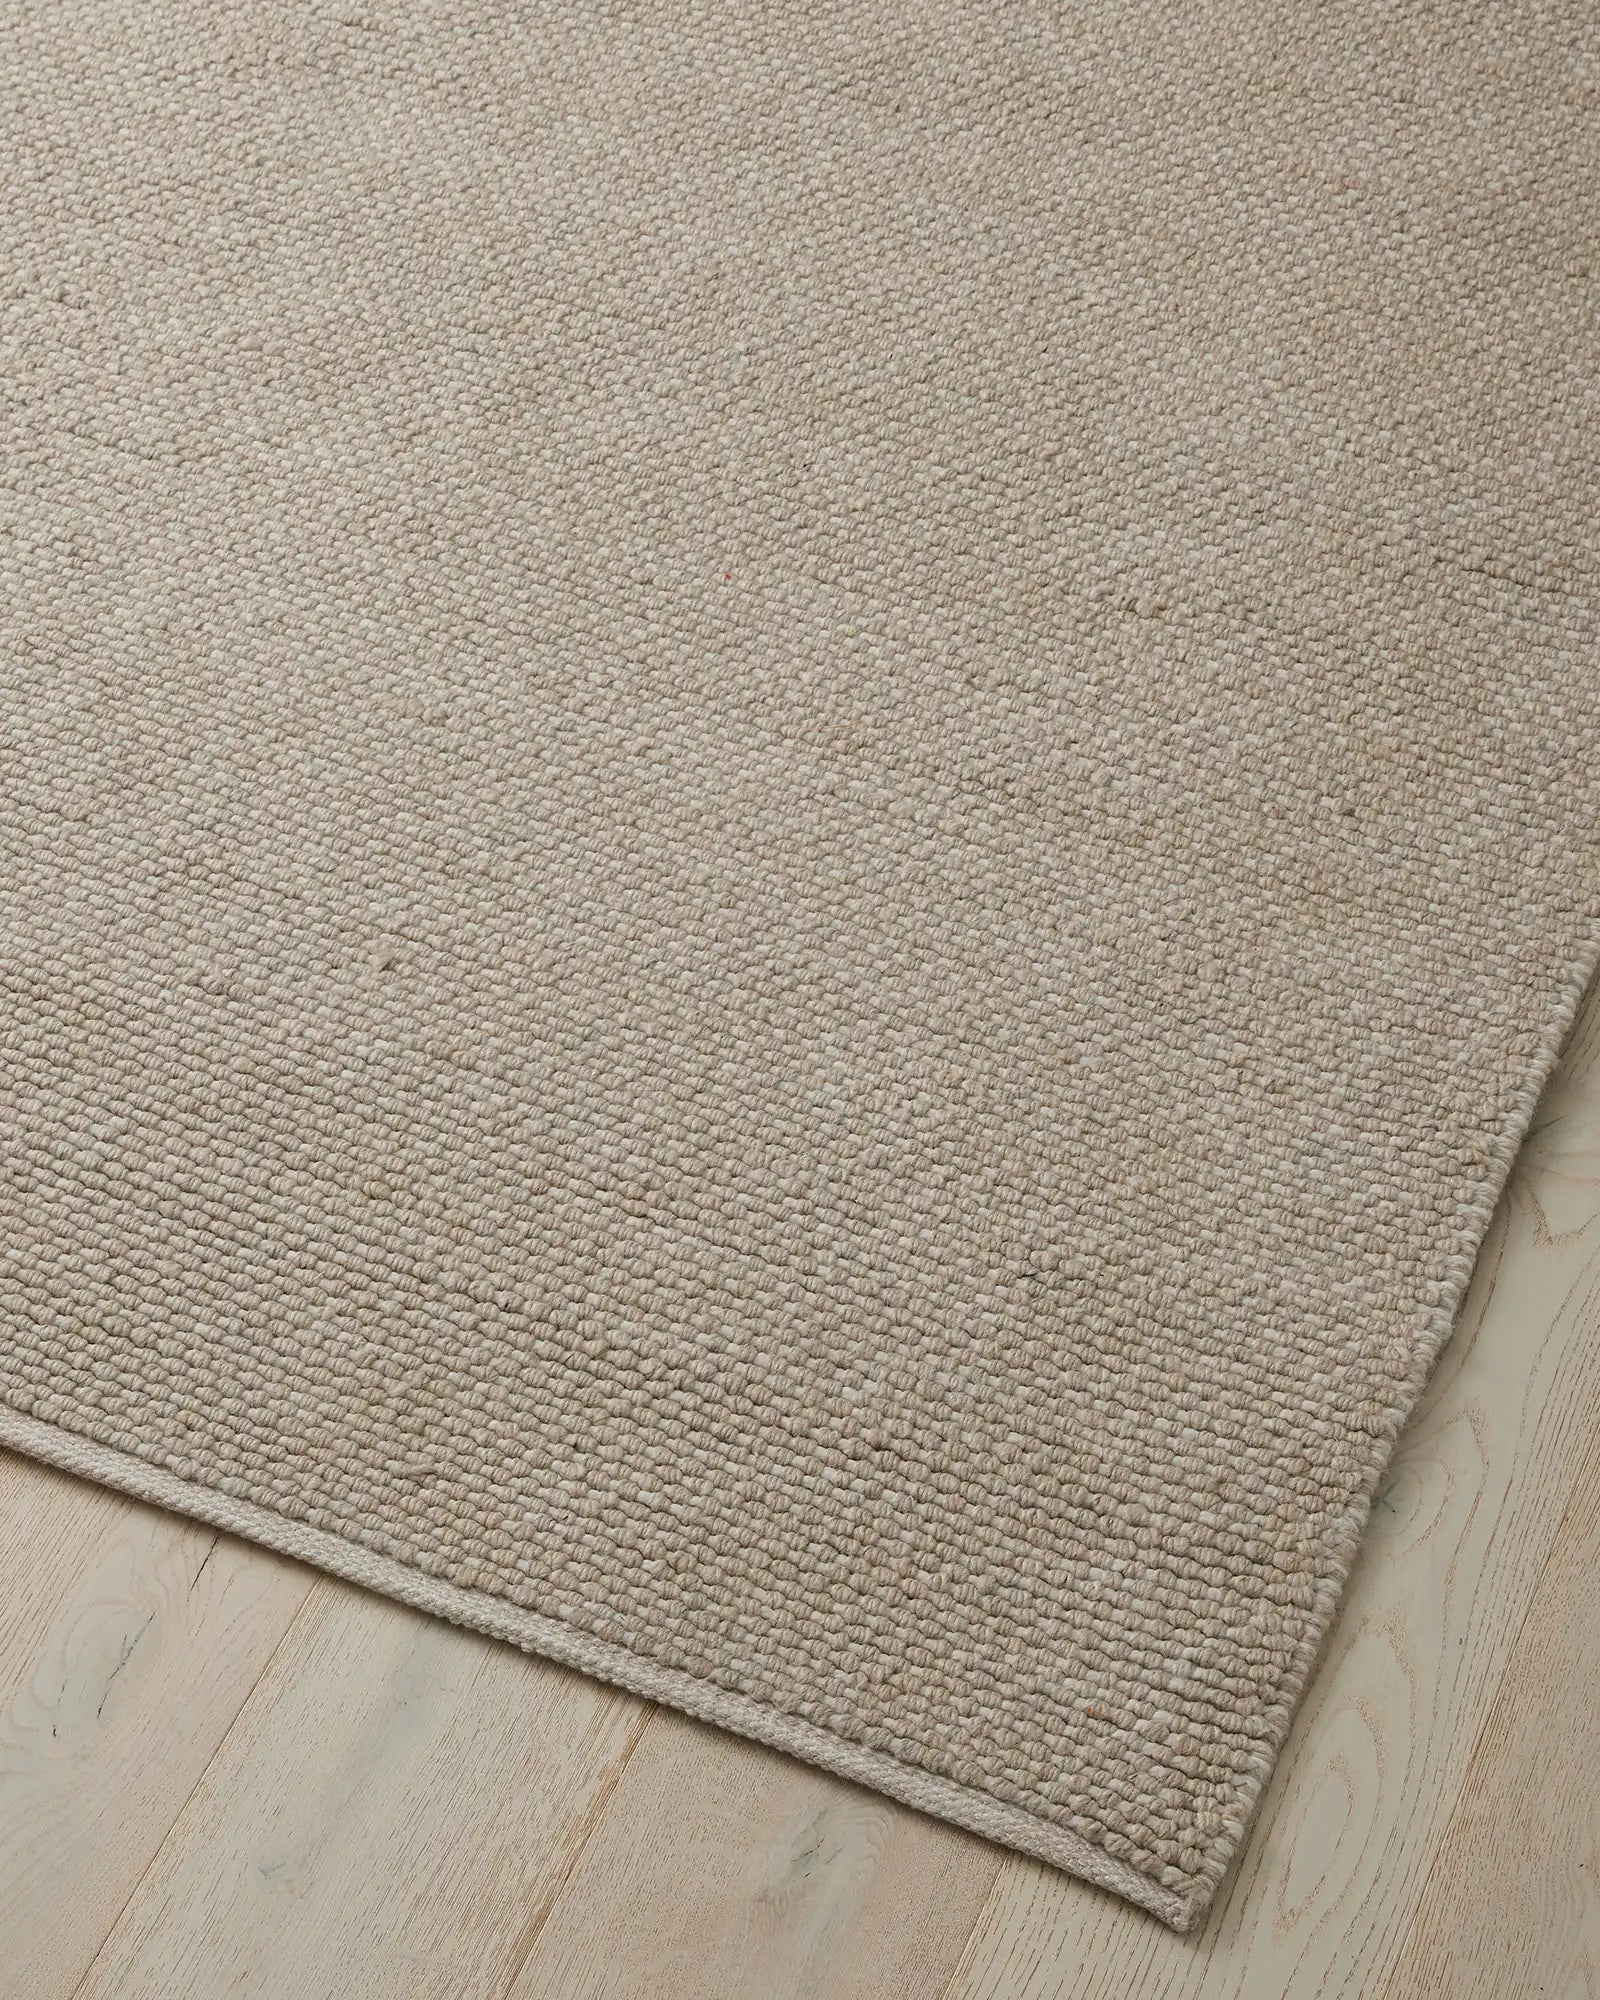 Detail of the Andorra Oatmeal rug's durable weave, showcasing its suitability for high-traffic areas and resistance to the elements.